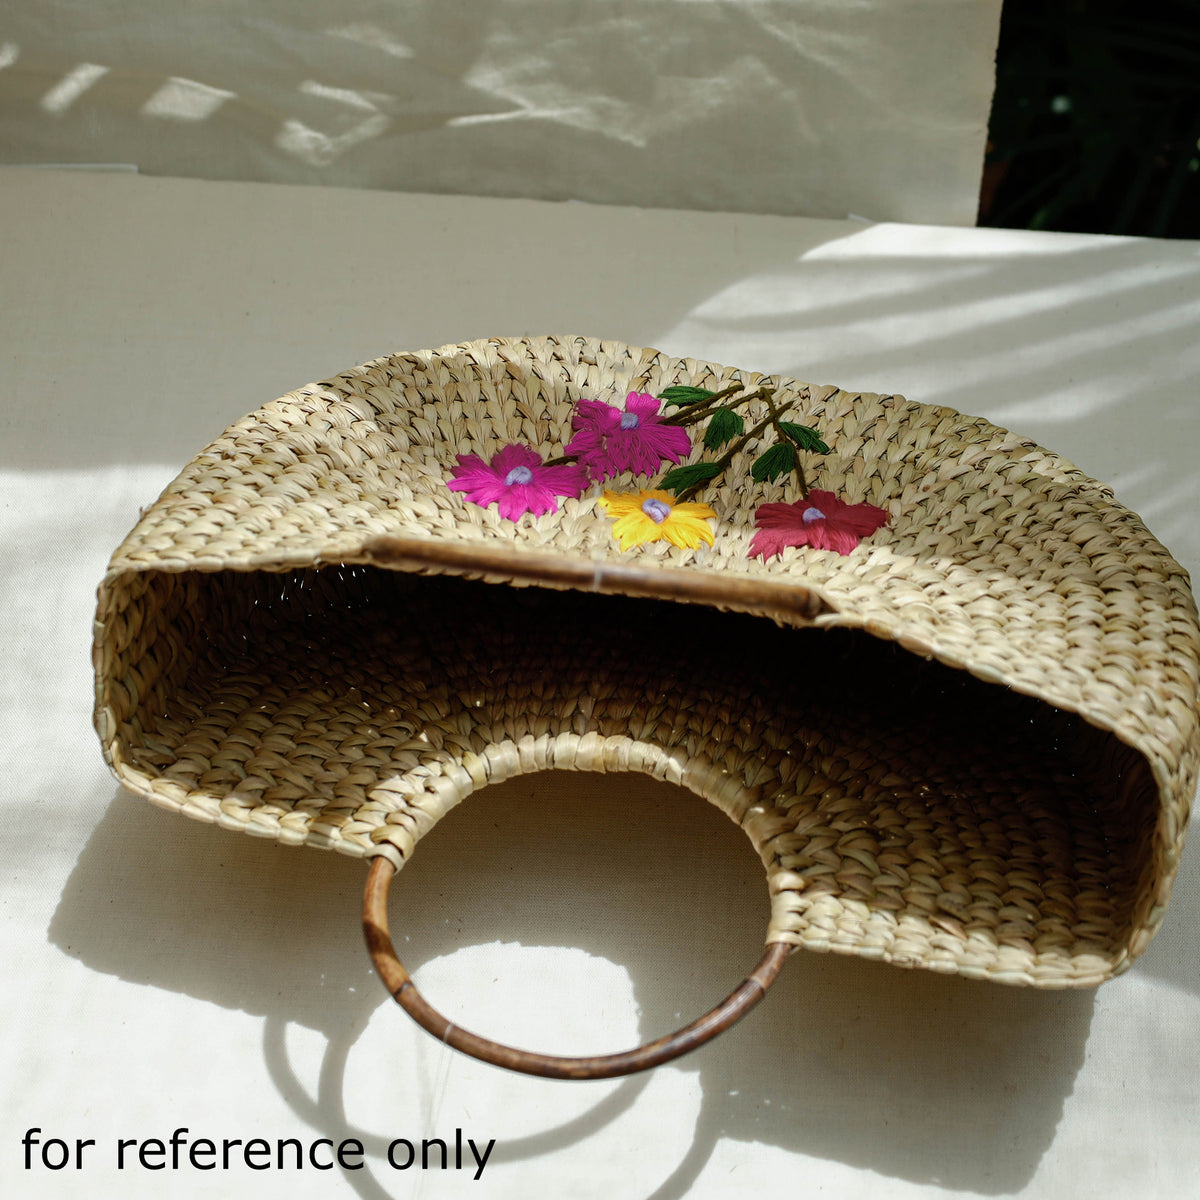 water reed hand bag